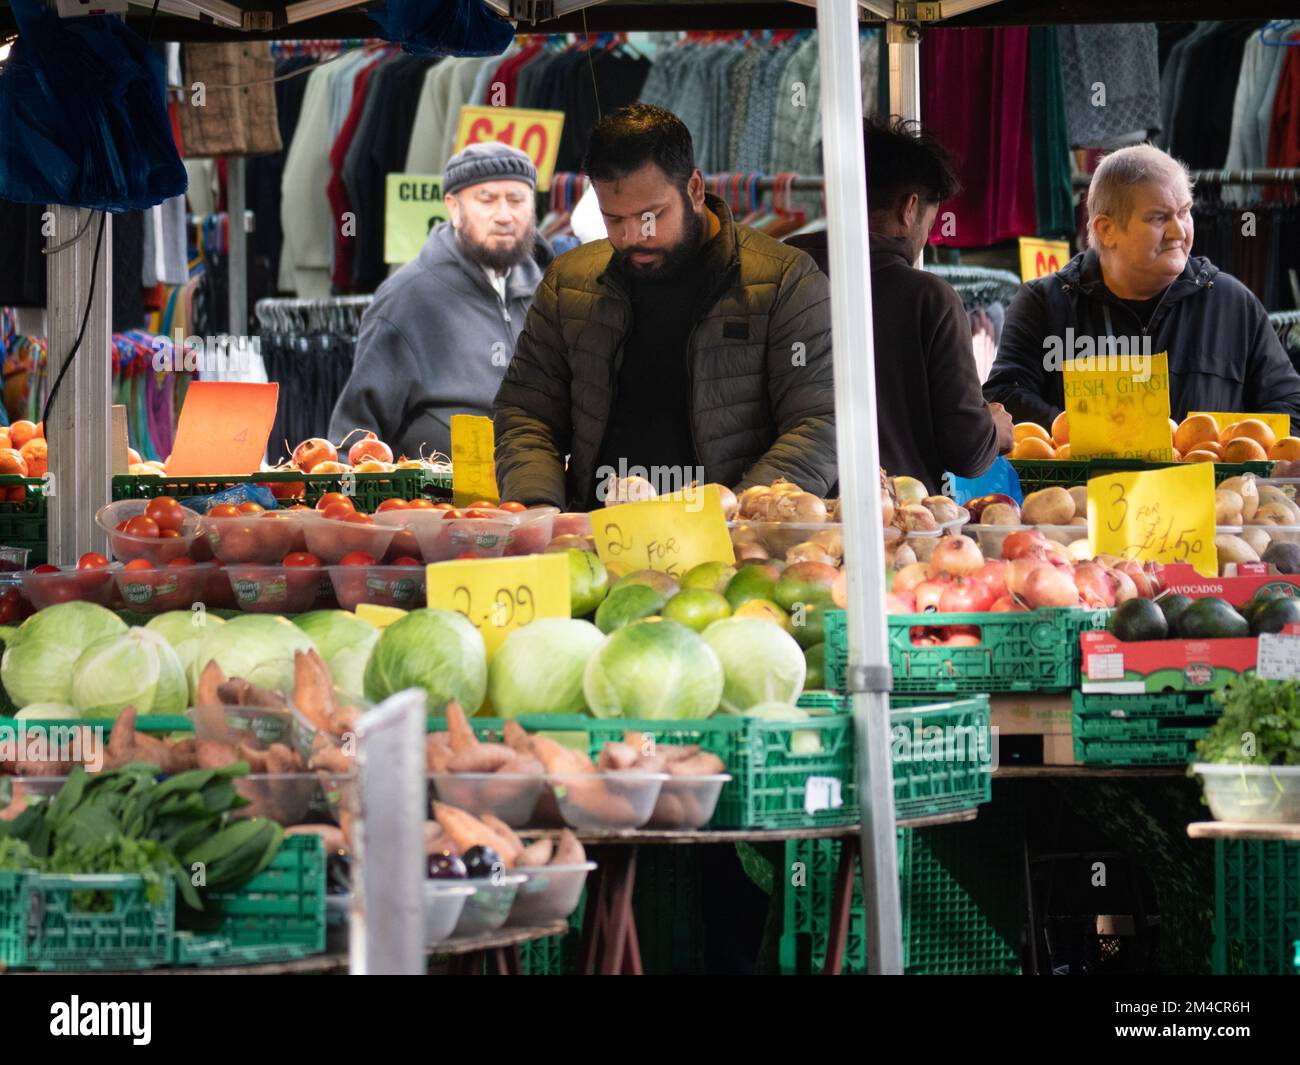 Greengrocer in Walthamstow market, London, UK, the longest outdoor market in Europe, with traders and market stall holders serving shoppers, with prices displayed in pounds sterling Stock Photo